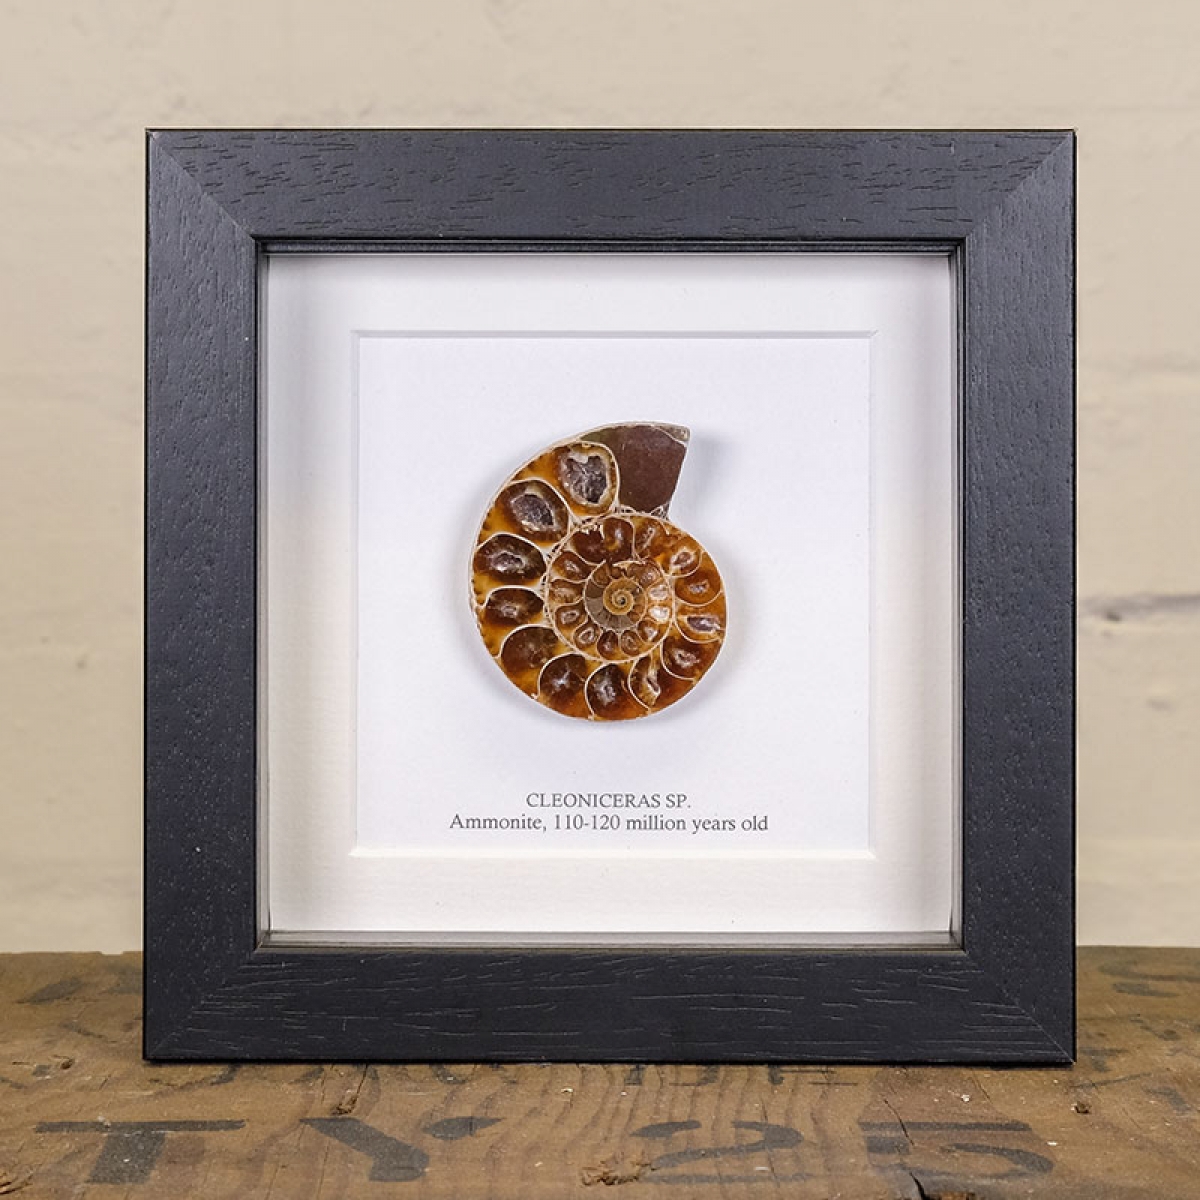 Minibeast Ammonite Cut and Polished Fossil in Box Frame (Cleoniceras sp) - Specimen #07